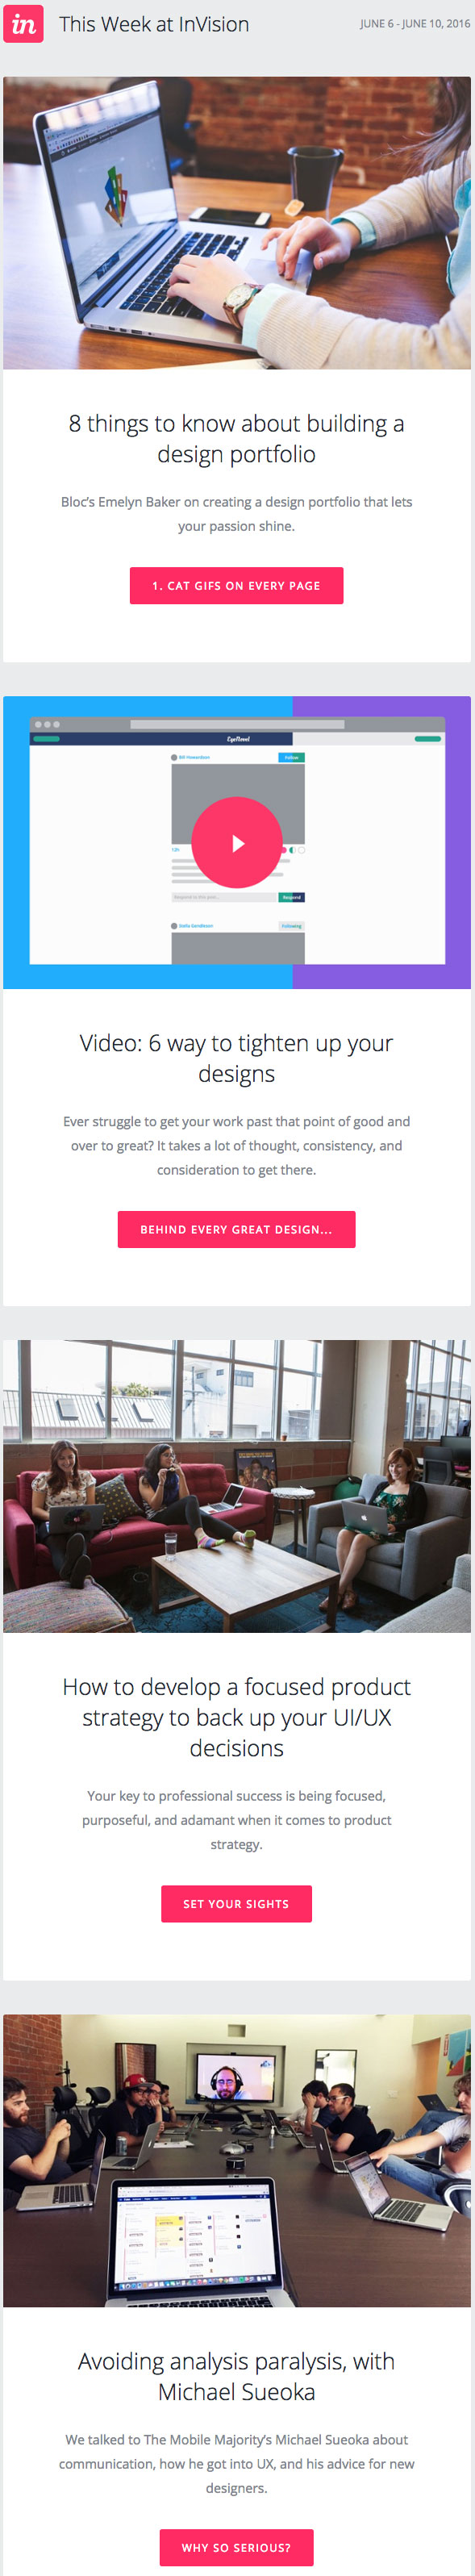 invision-email